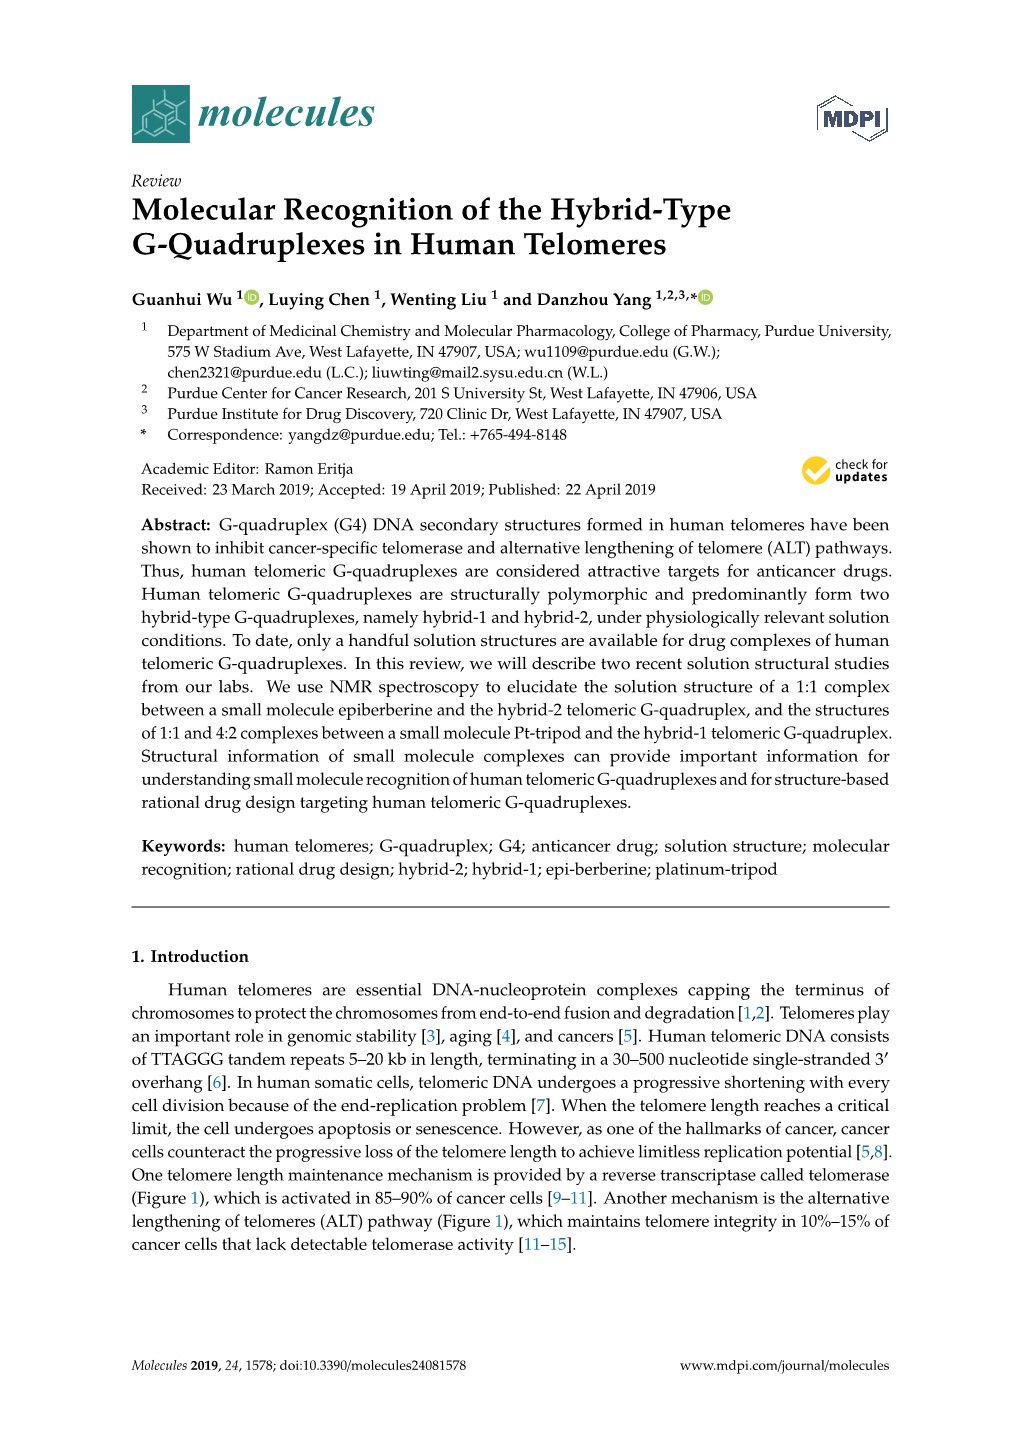 Molecular Recognition of the Hybrid-Type G-Quadruplexes in Human Telomeres